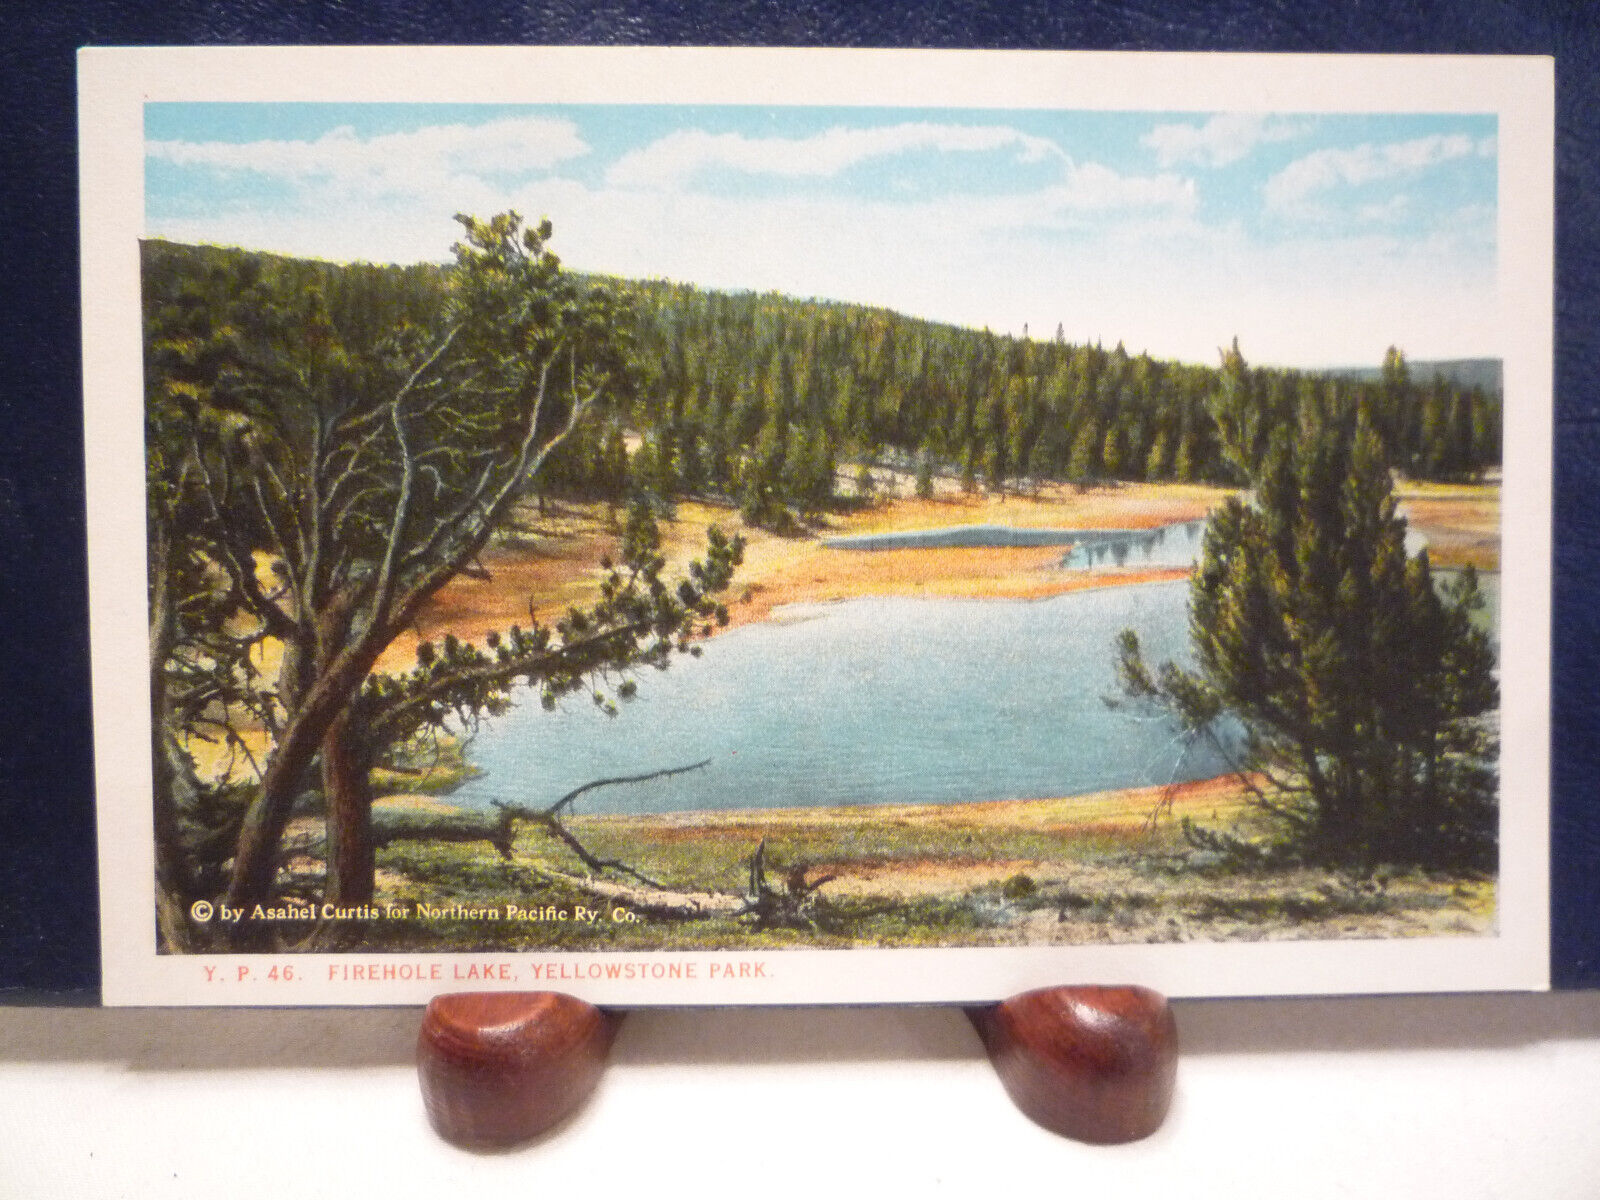 1922 YELLOWSTONE postcard #YP46 Firehole Lake ~ by Asahel Curtis for NPRY